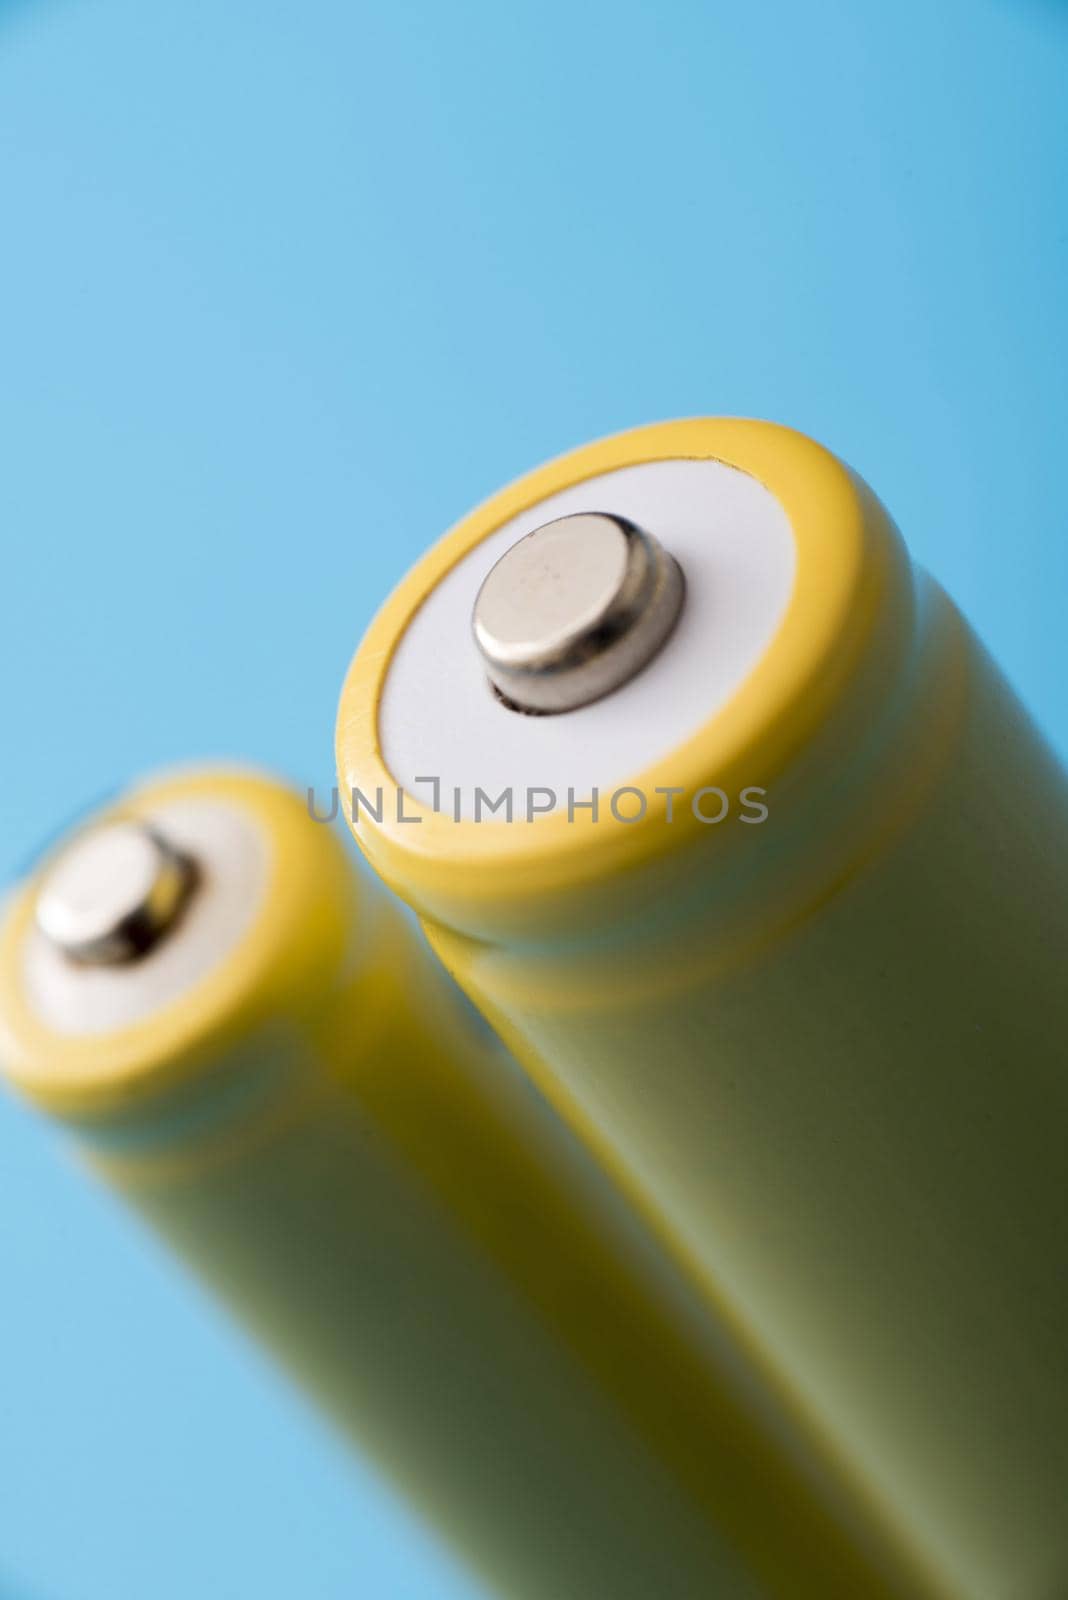 Close up view of the positive terminal on a rechargeable battery over a blue background in a power and energy concept